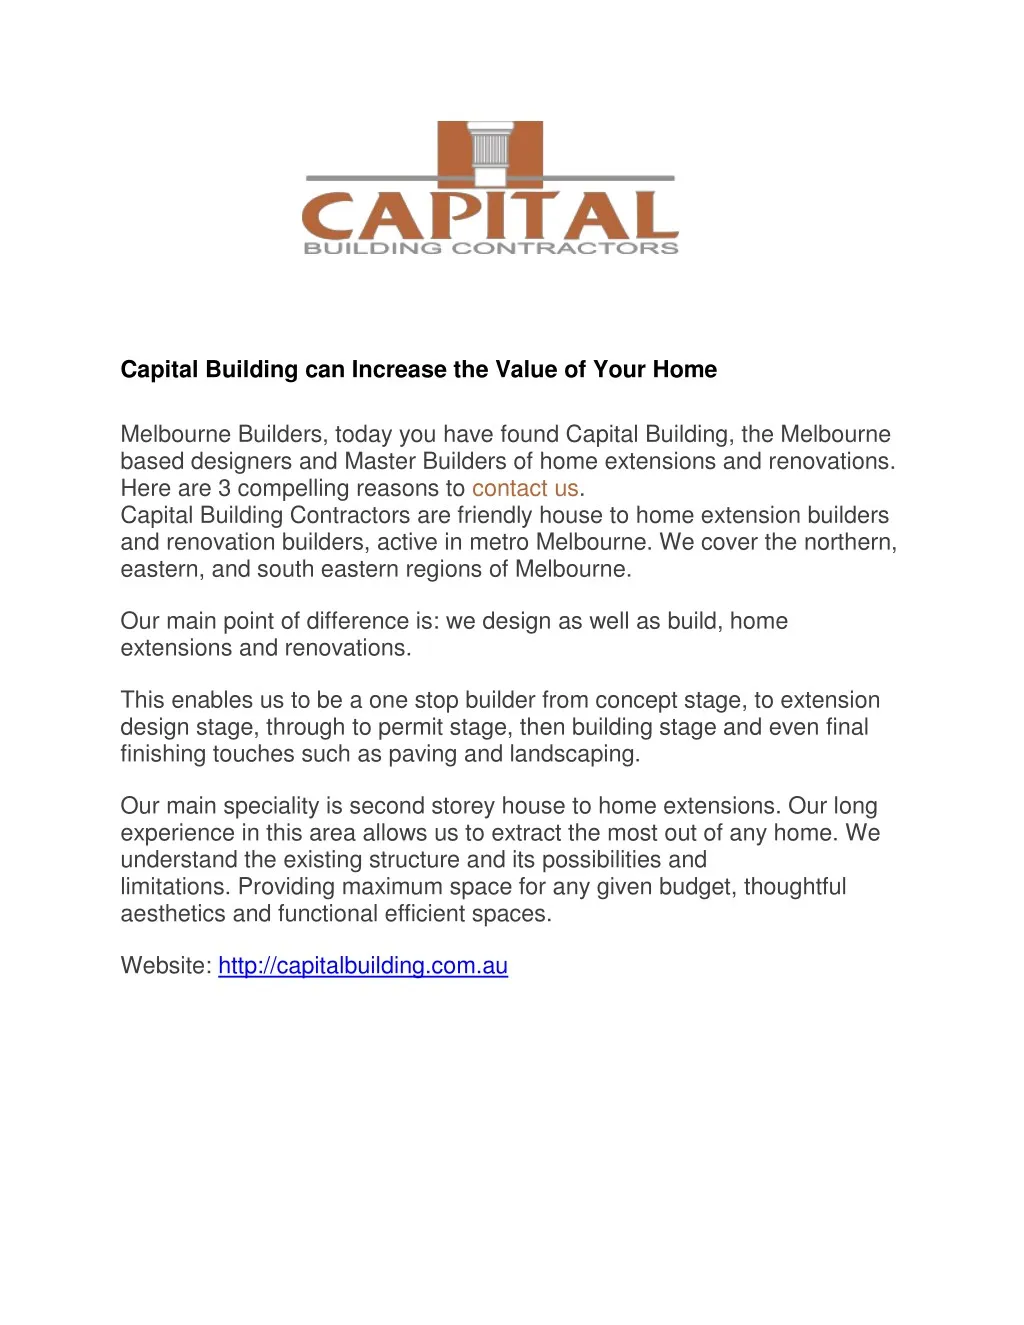 capital building can increase the value of your